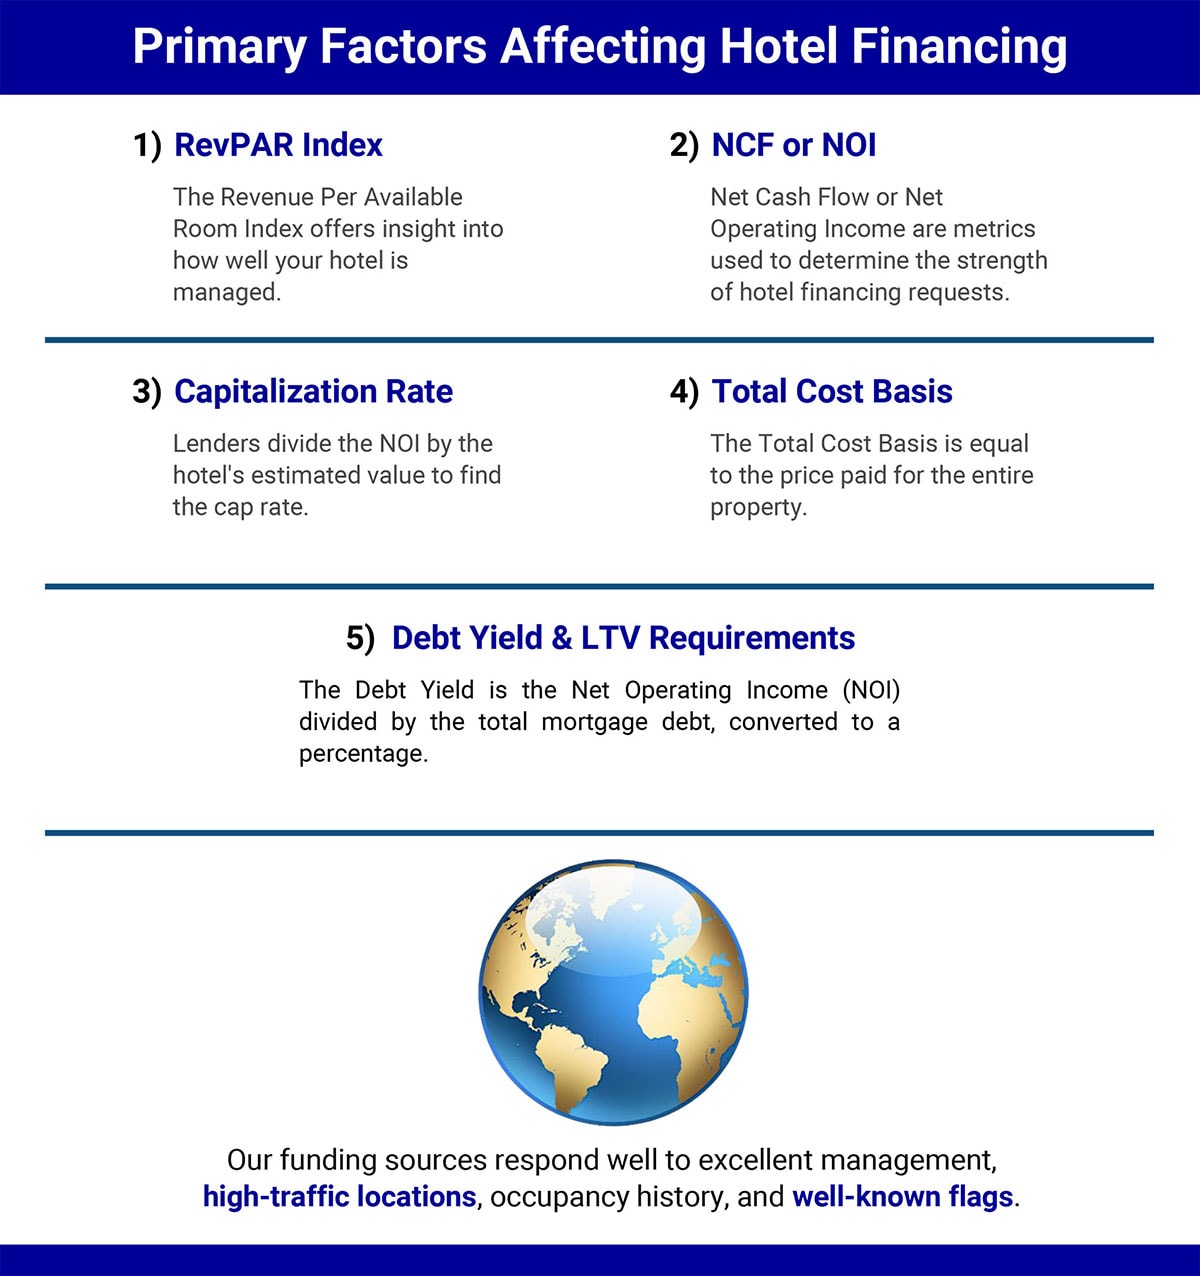 An infographic showing the primary factors affecting hotel financing